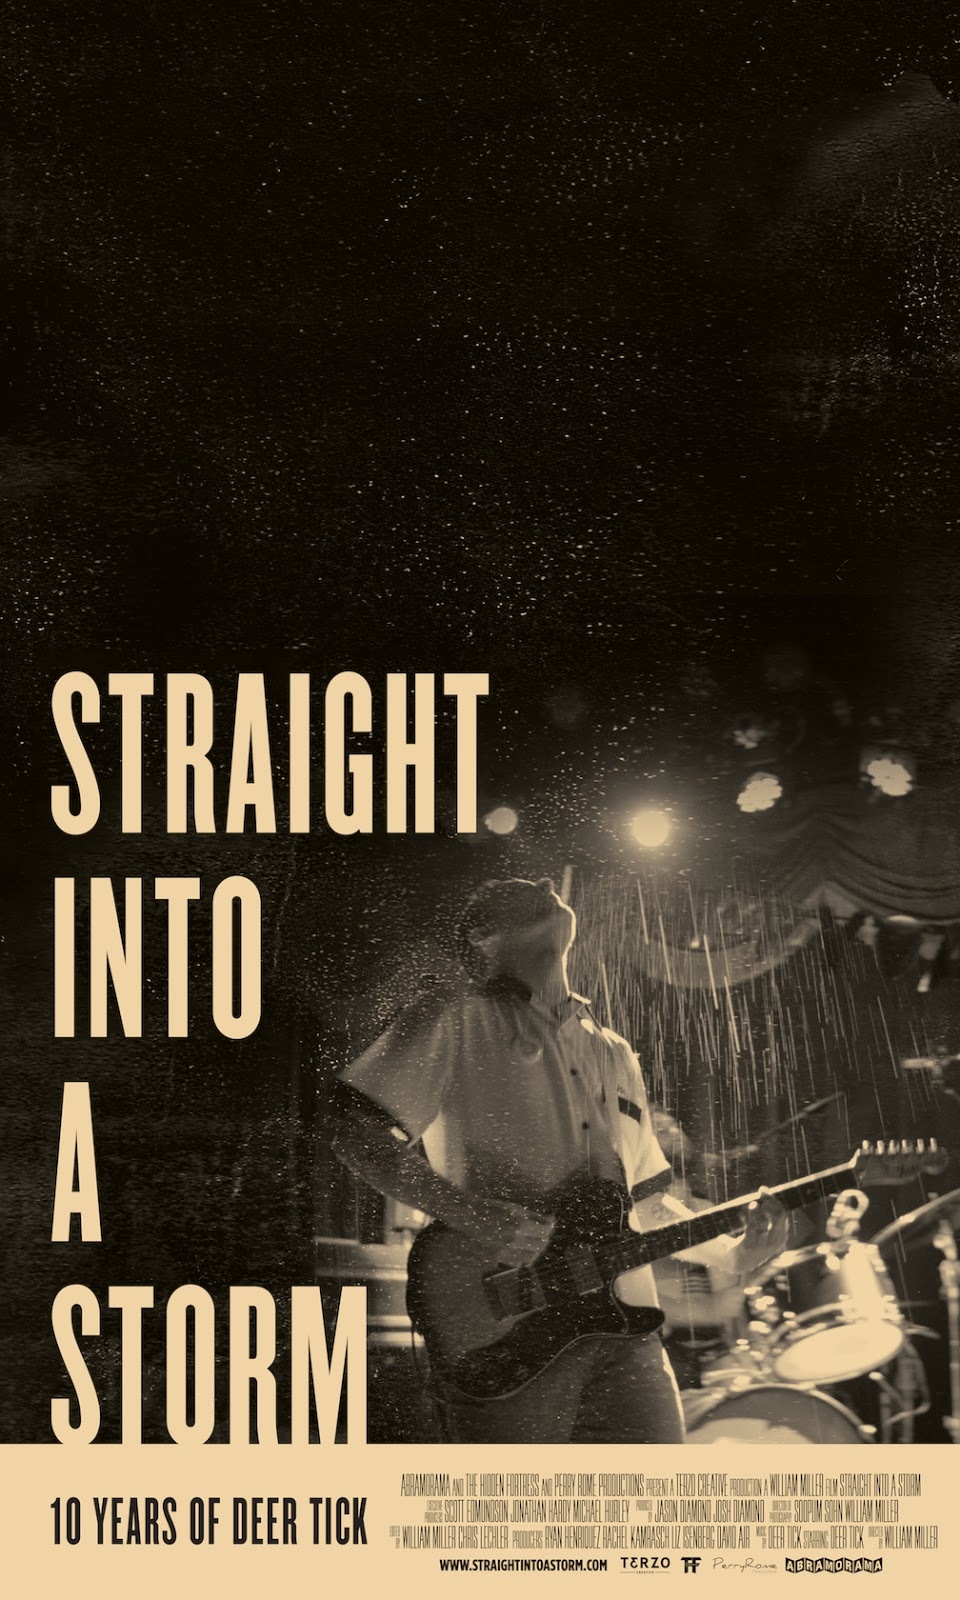 Straight Into a Storm A New Rock Film About Deer Tick